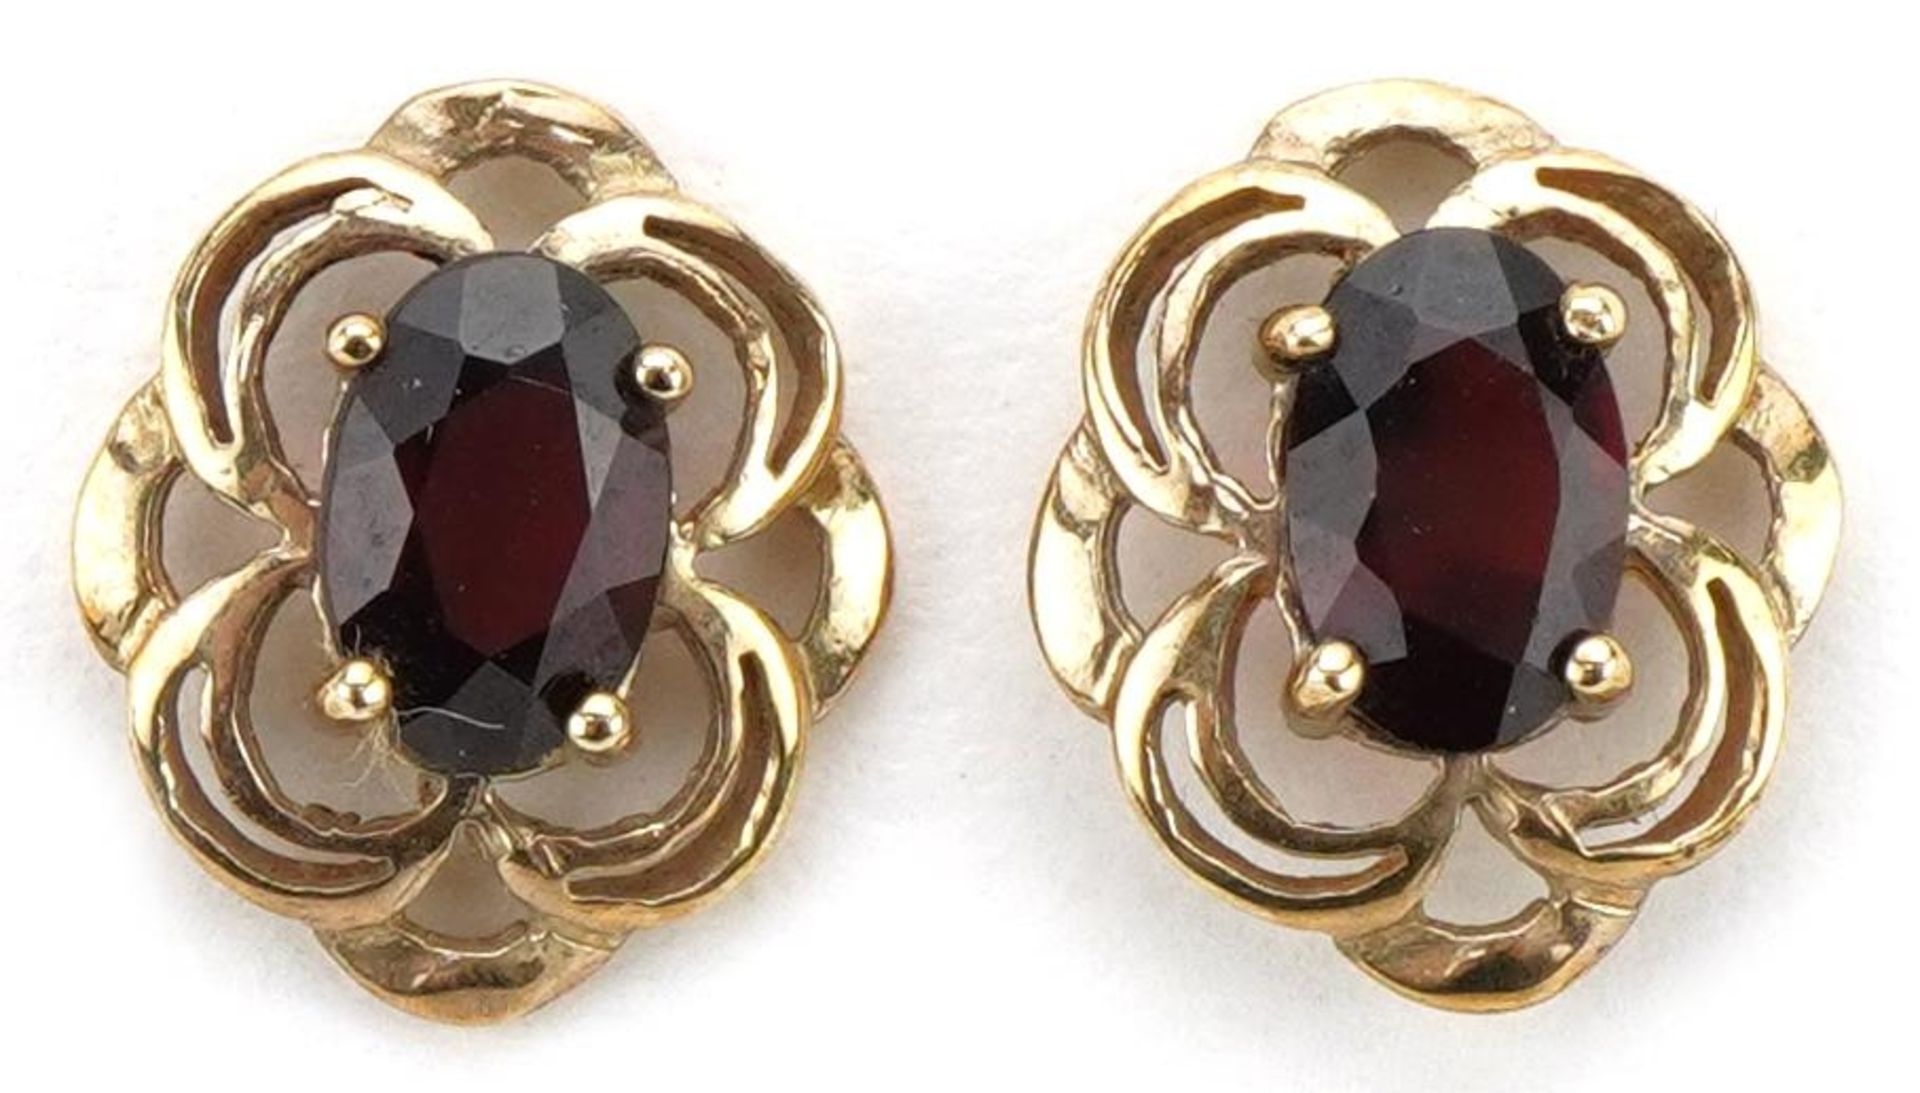 Pair of 9ct gold garnet openwork stud earrings, 1.1cm high, 1.1g : For further information on this